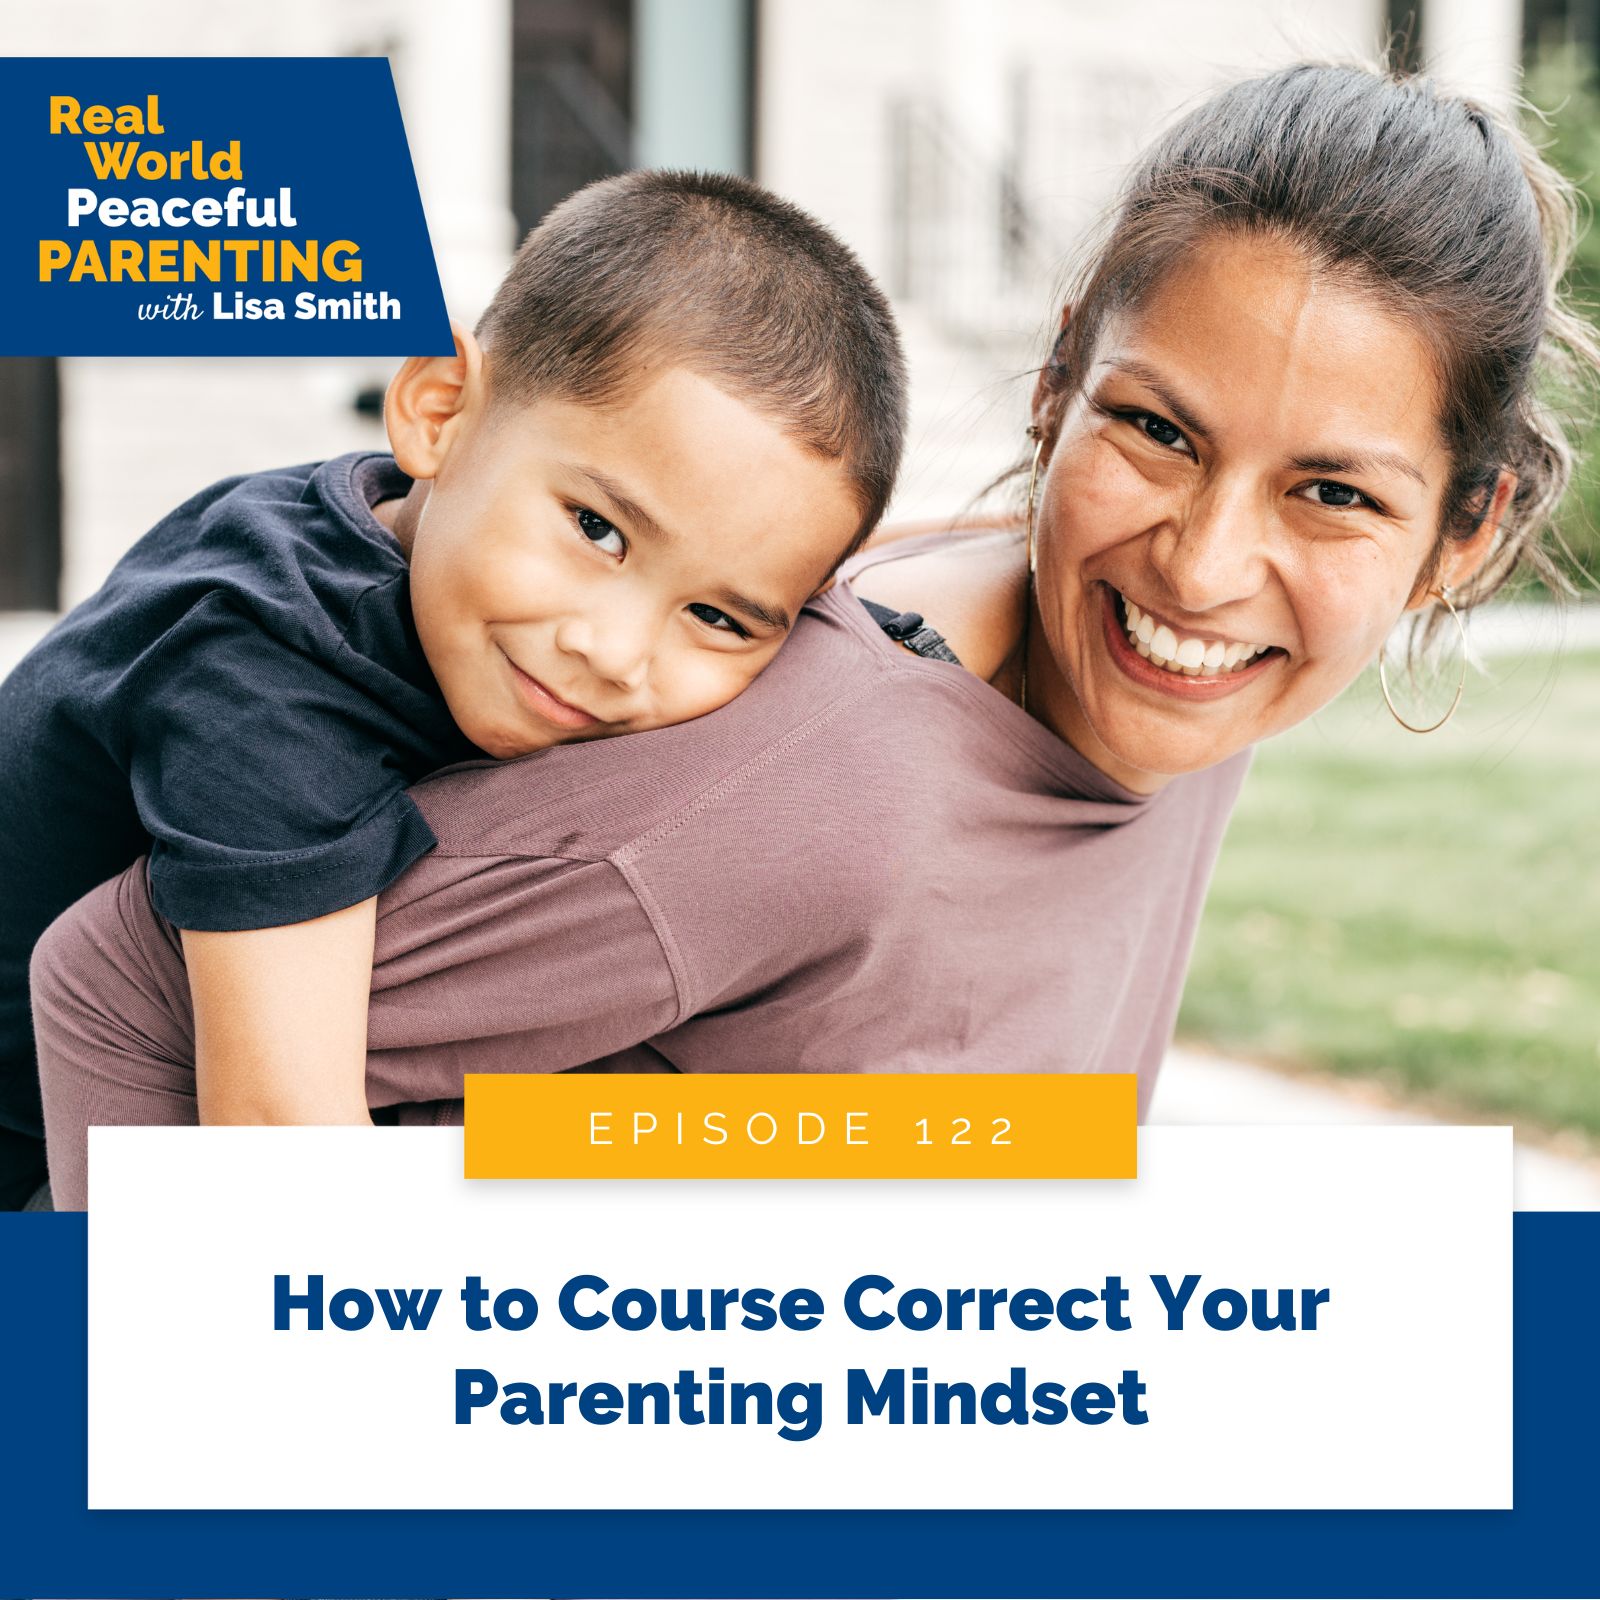 Real World Peaceful Parenting Lisa Smith | How to Course Correct Your Parenting Mindset